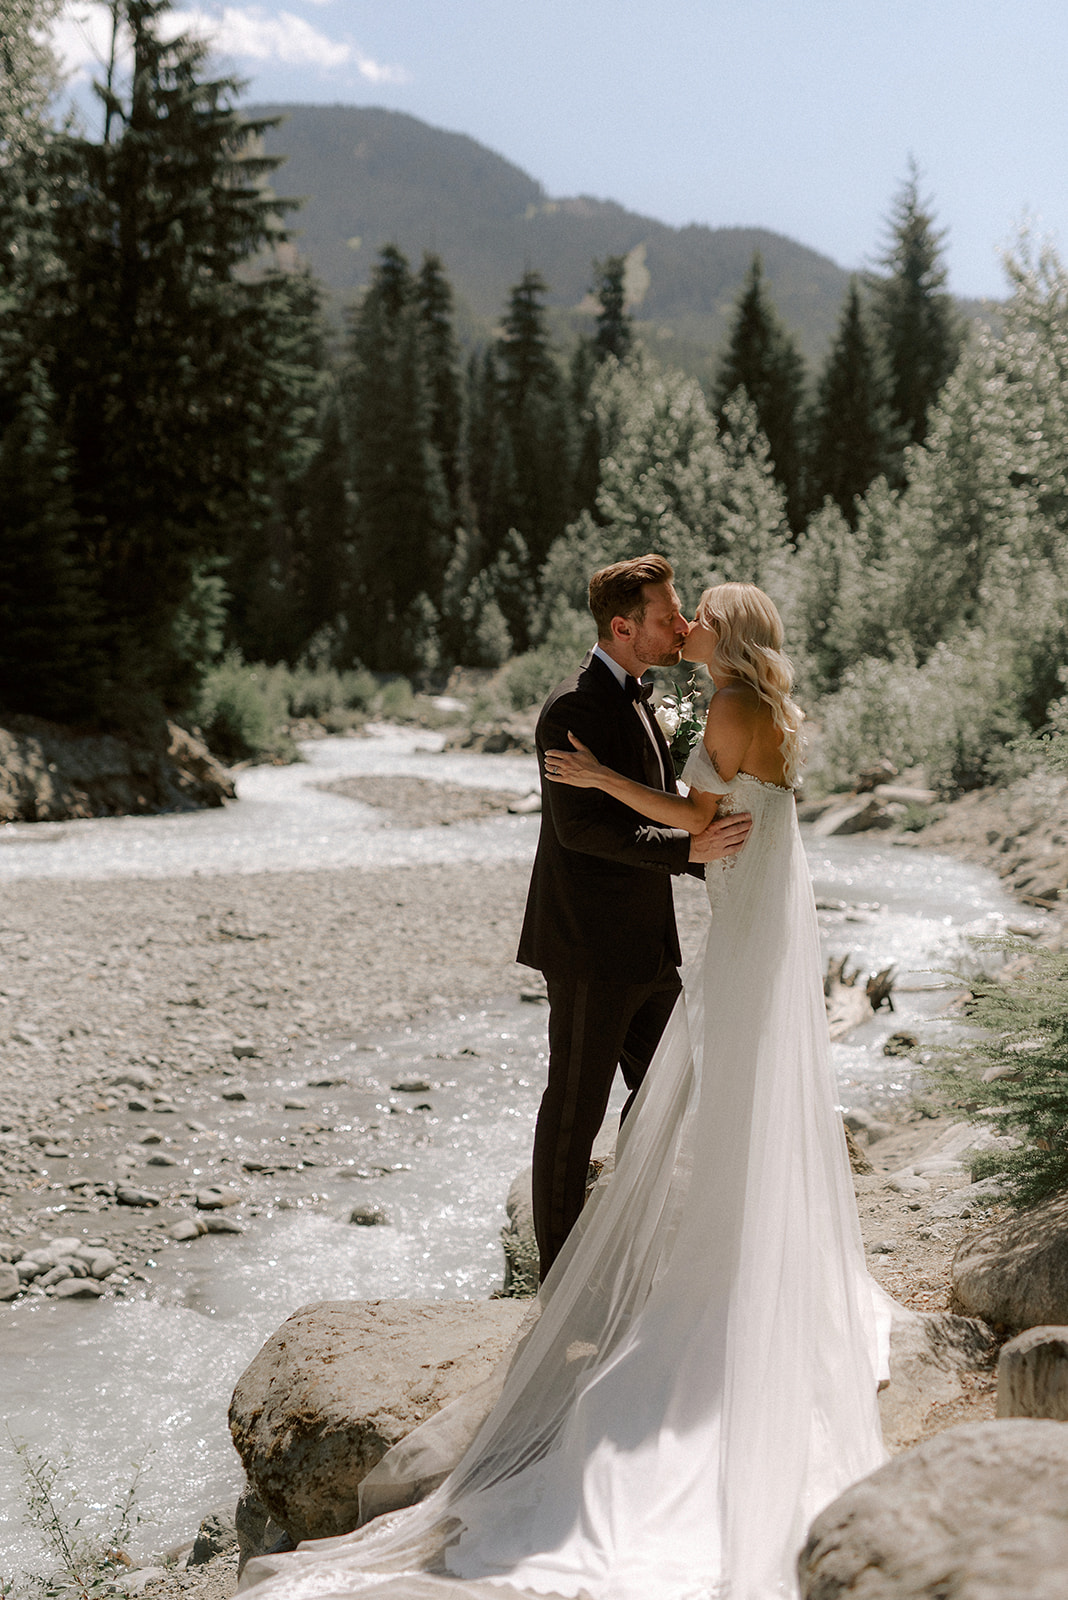 Vancouver wedding photographer captures photos of couple having their first look in Whistler